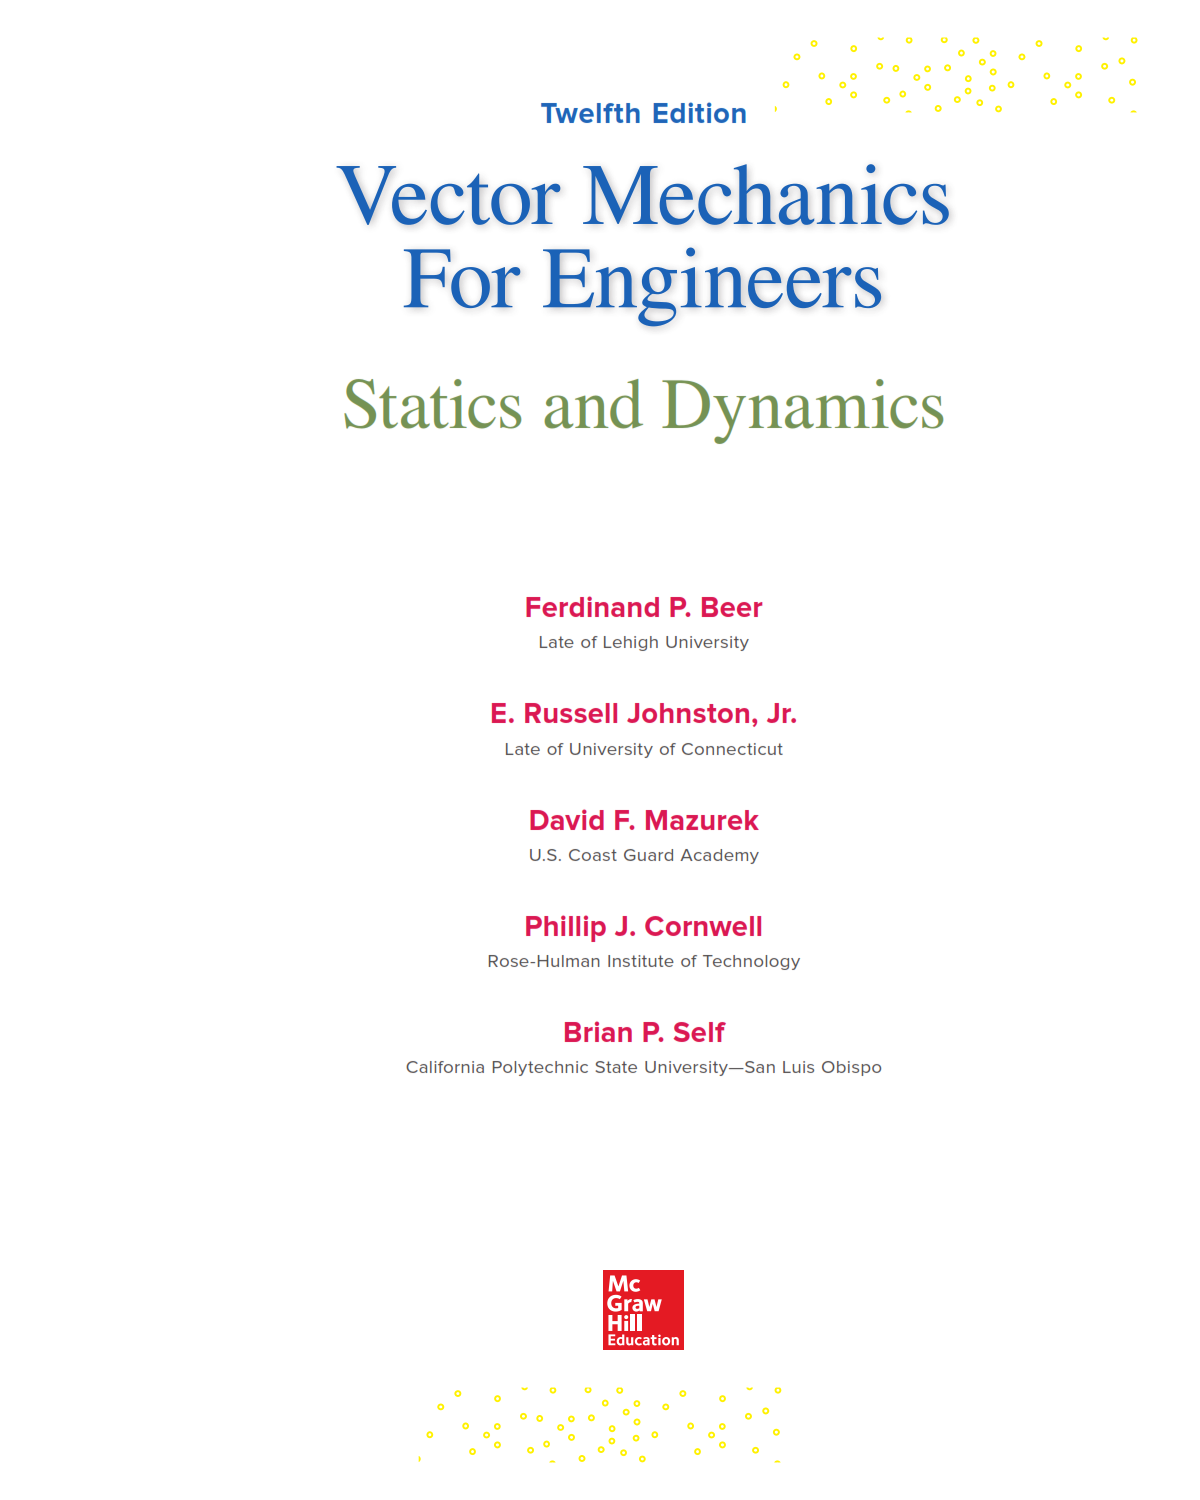 download free Vector Mechanics for Engineers Statics and Dynamics written by Beer Johnston 12th edition eBook in pdf format